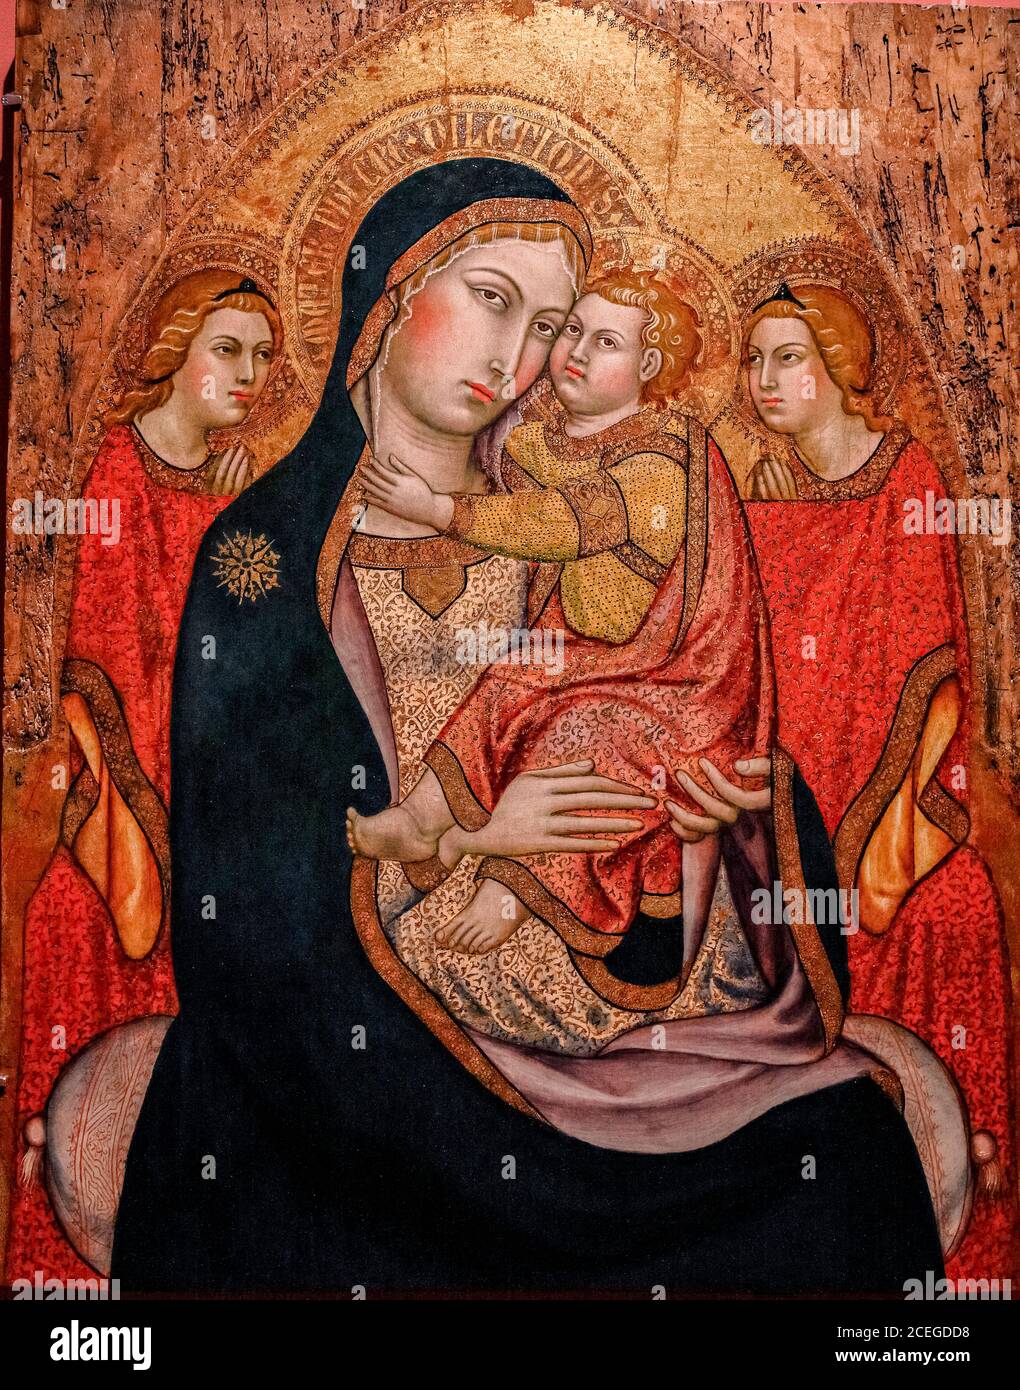 Italy Umbria Perugia - National Gallery of Umbria: Monographic Exhibition  (1362-1422) - Madonna with child and two angels Stock Photo